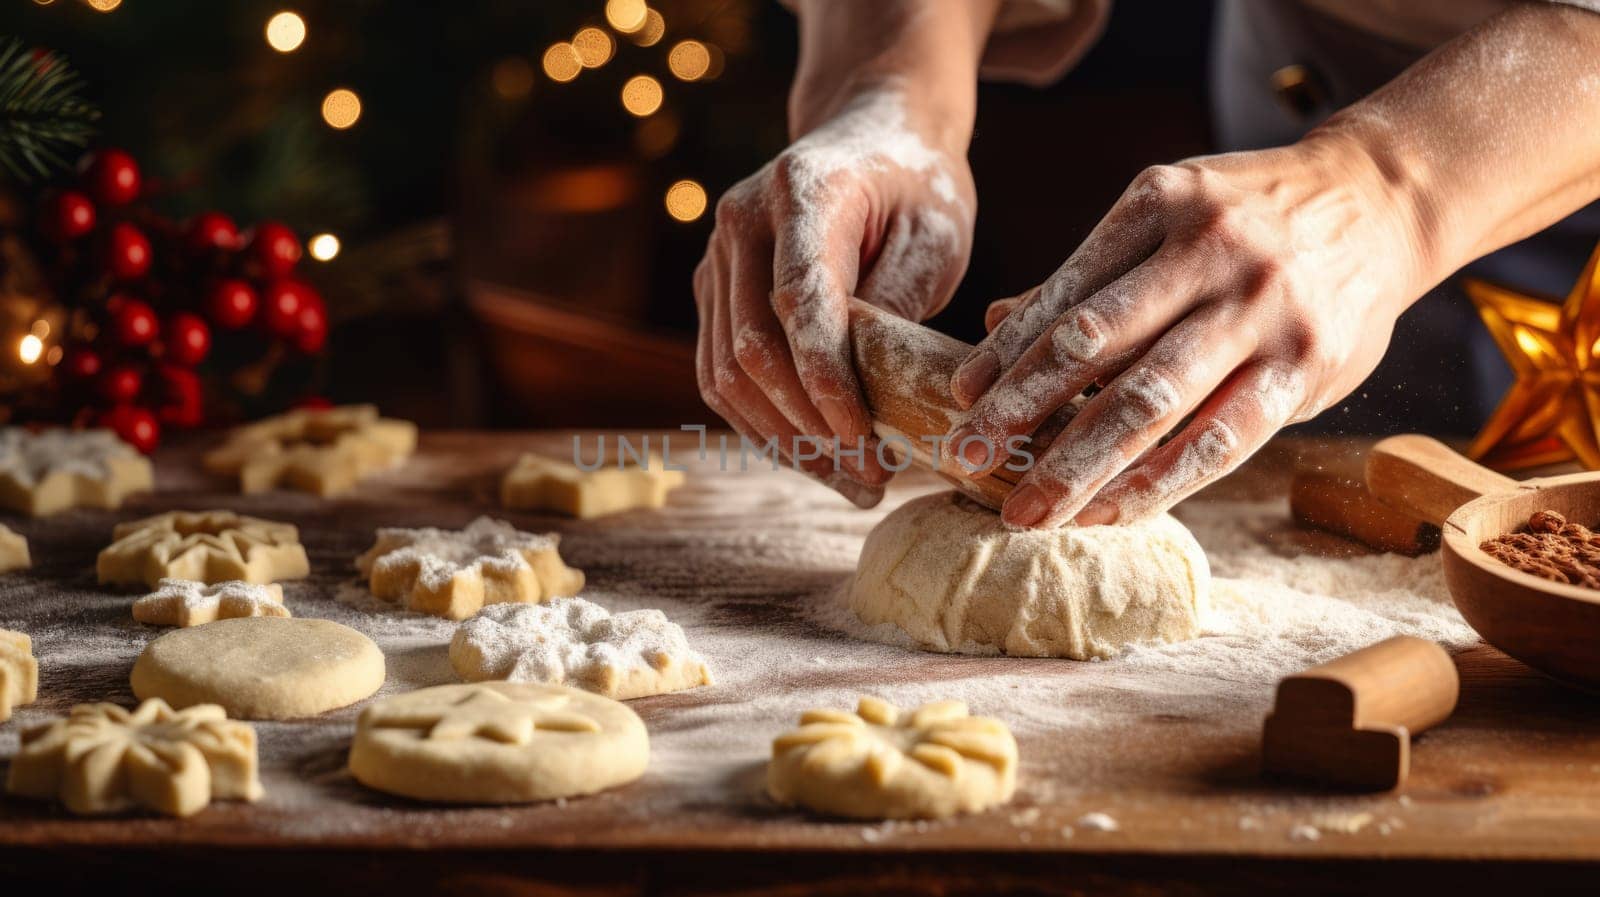 a person making Christmas cookies with festive decorations in the background. It is a holiday tradition of baking and decorating. High quality photo